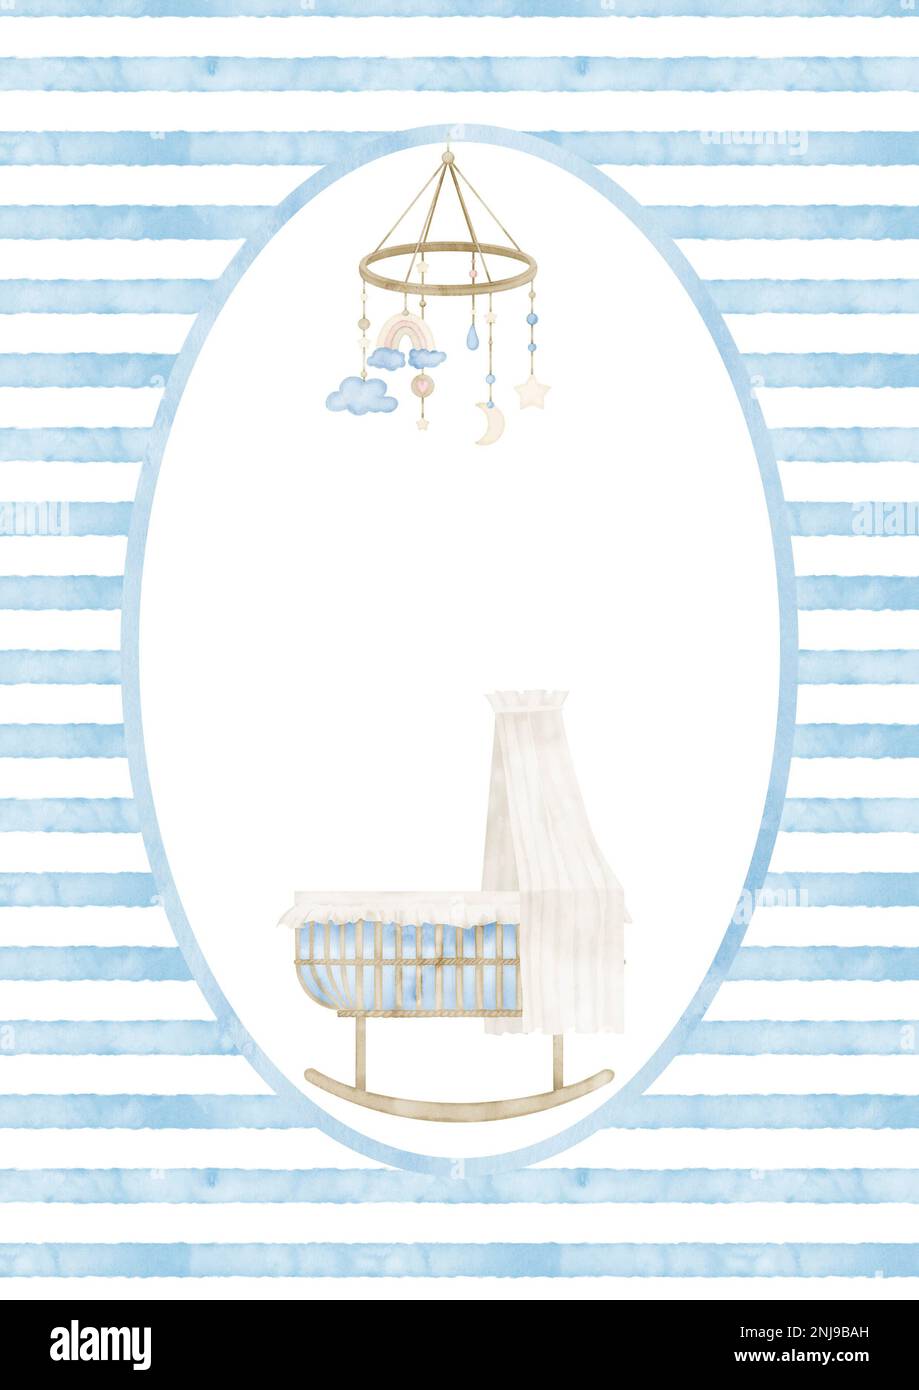 Template with baby Cradle and hanging mobile for newborn shower. Hand drawn watercolor illustration with childish crib in blue pastel colors for greeting cards or invitations on isolated background. Stock Photo